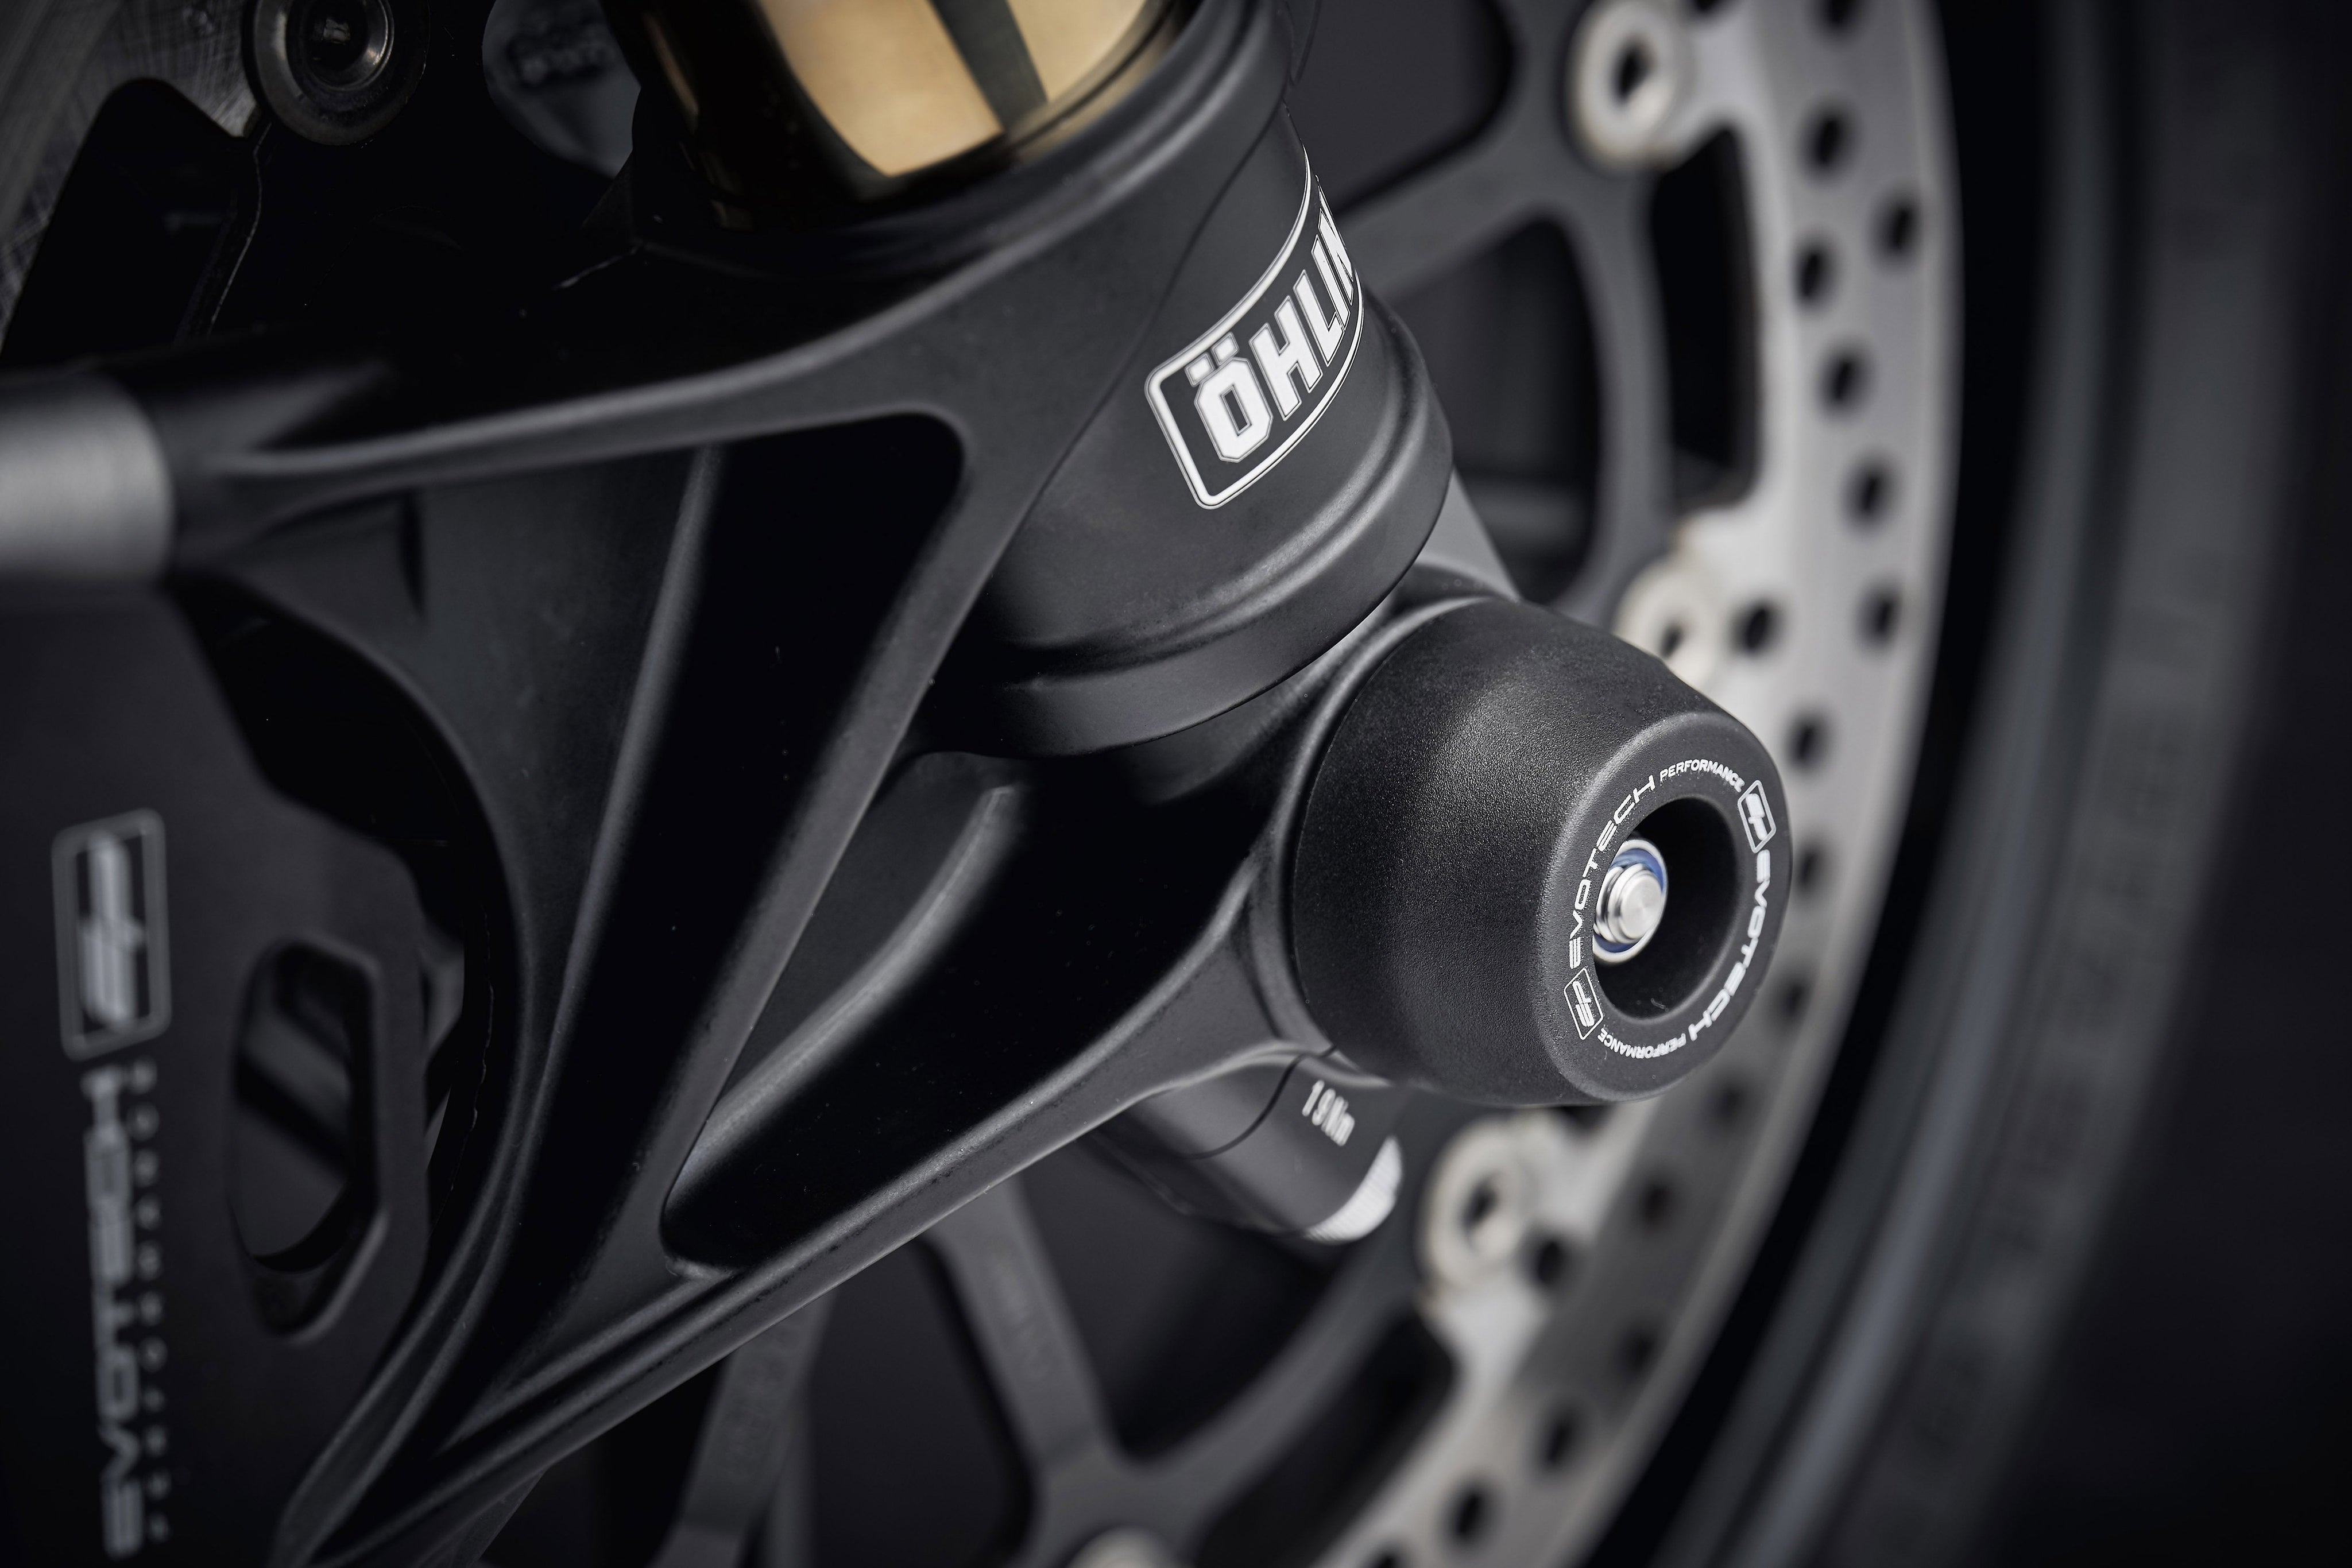 The offside front wheel of the Ducati Streetfighter V4 SP with EP Spindle Bobbins Crash Protection fitted.